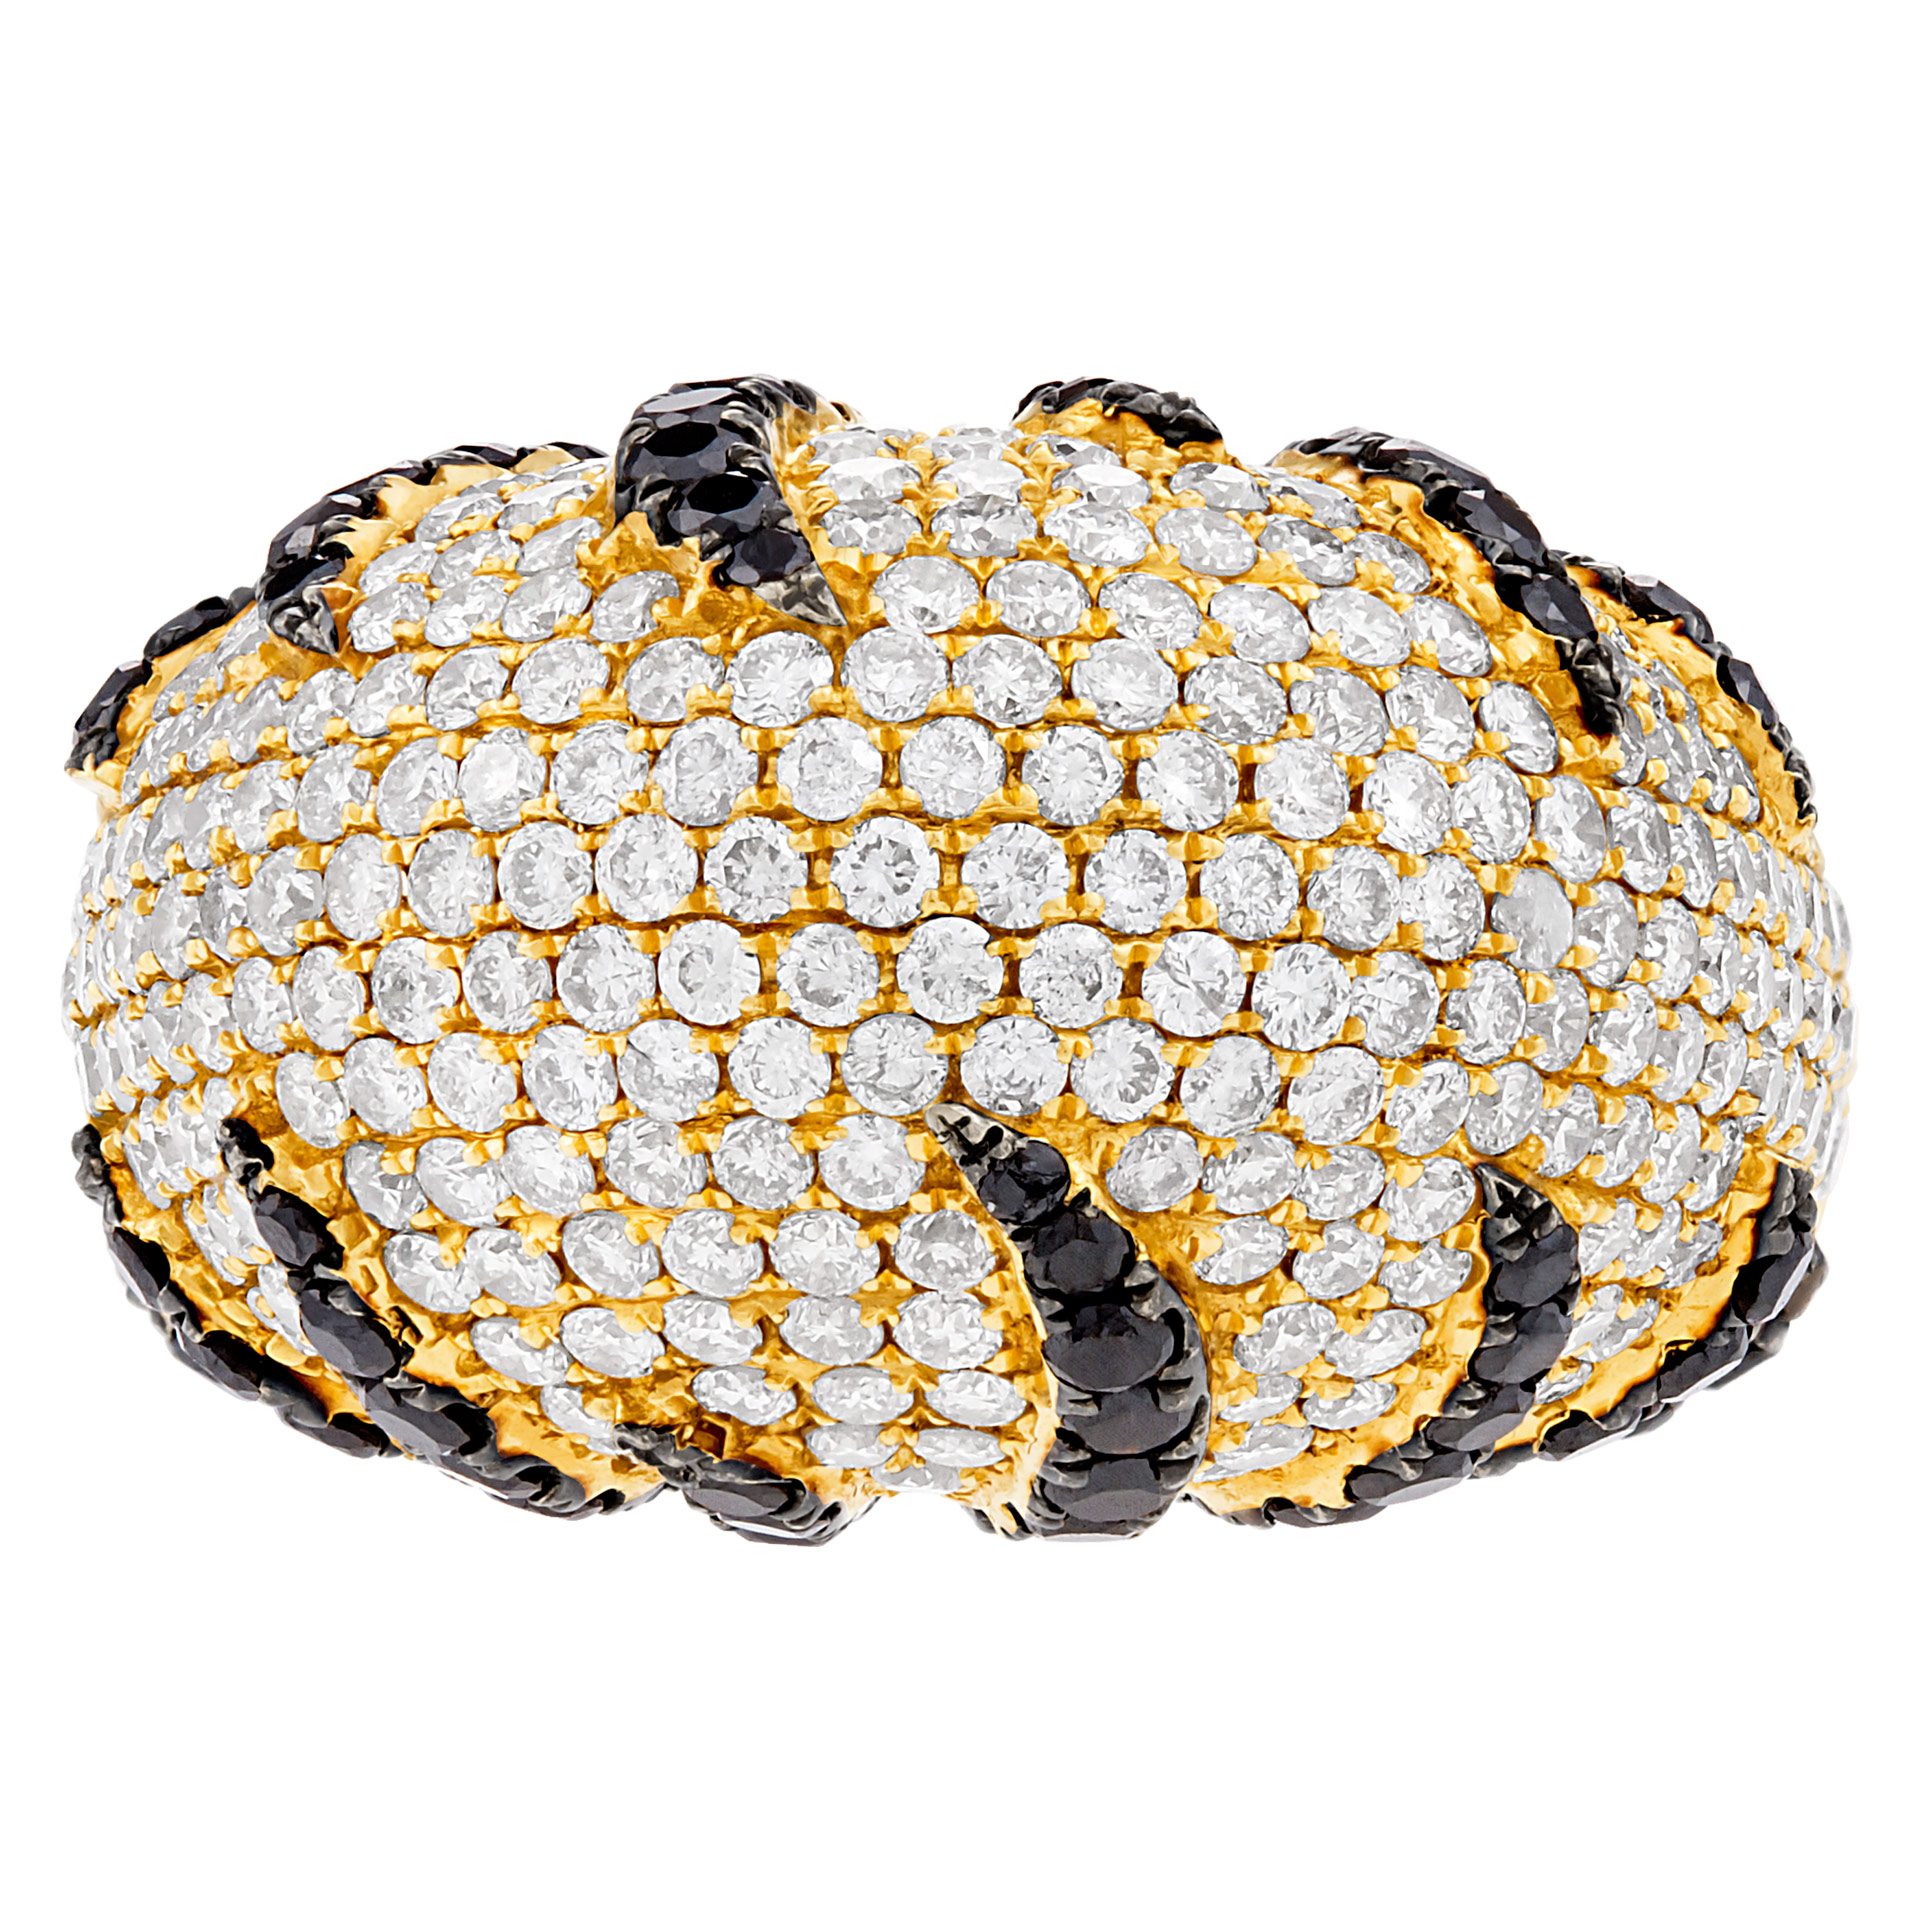 Sparkling domed white & black diamond ring in 18k yellow gold. 4.32cts in diamonds